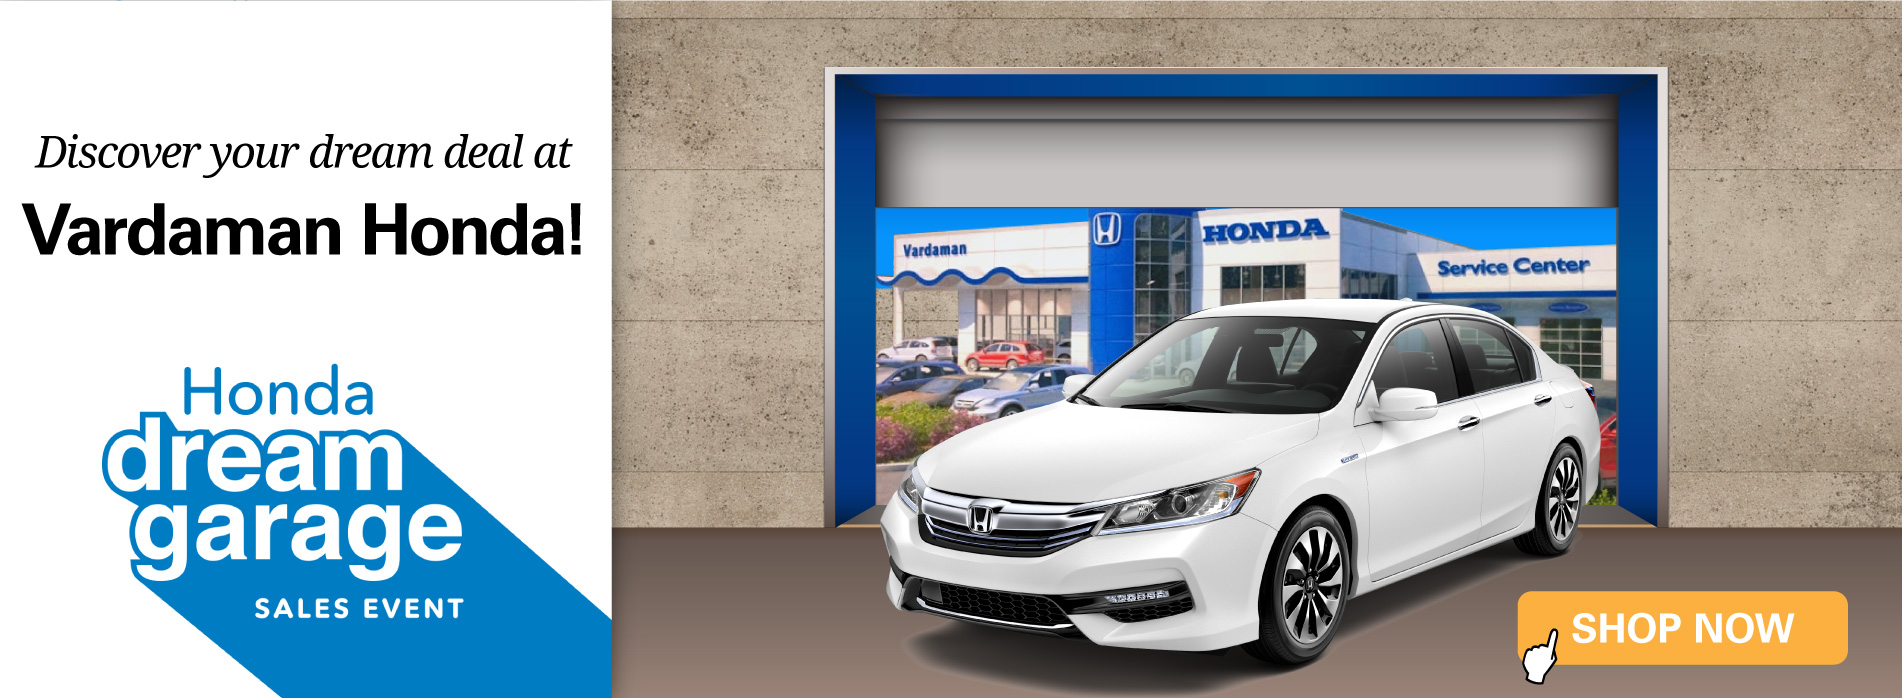 What are some services offered by Honda dealerships?